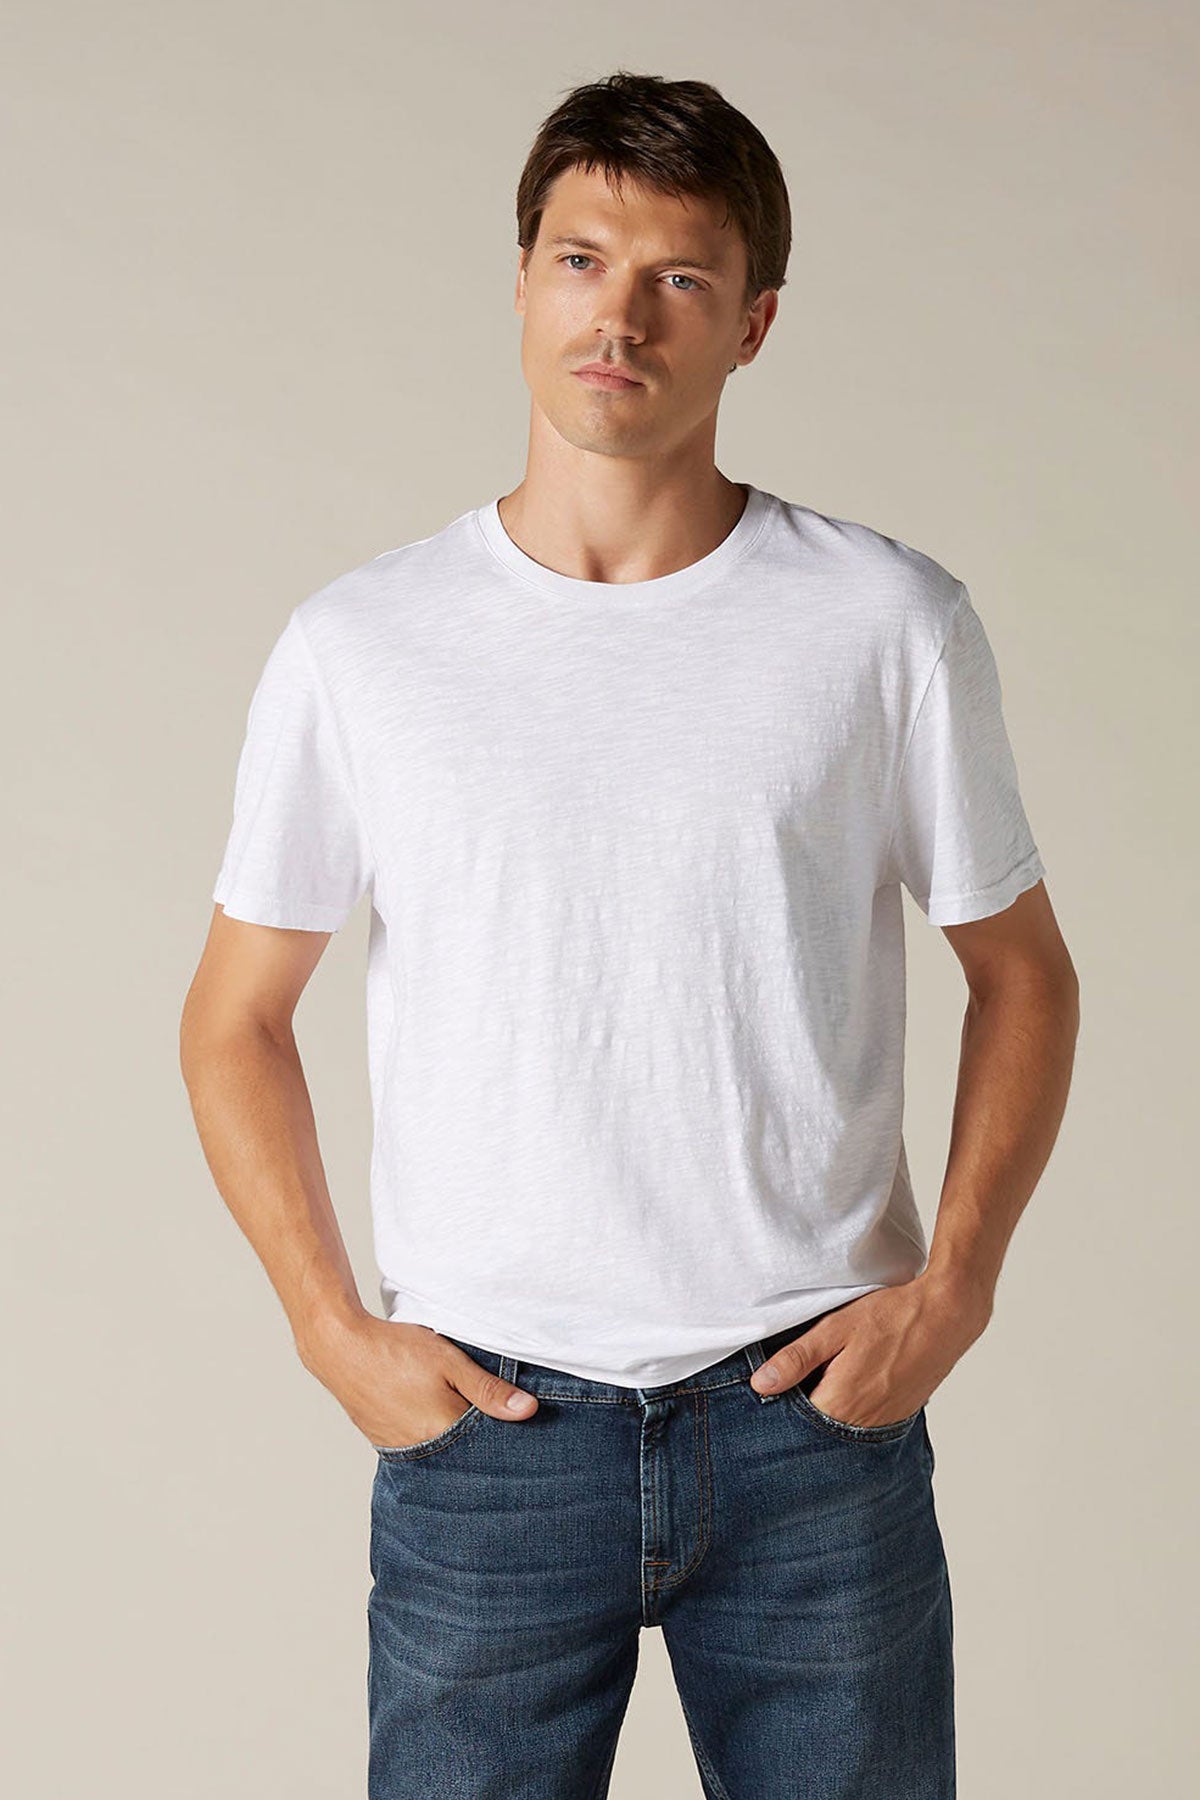 7 For All Mankind T-shirt-Libas Trendy Fashion Store